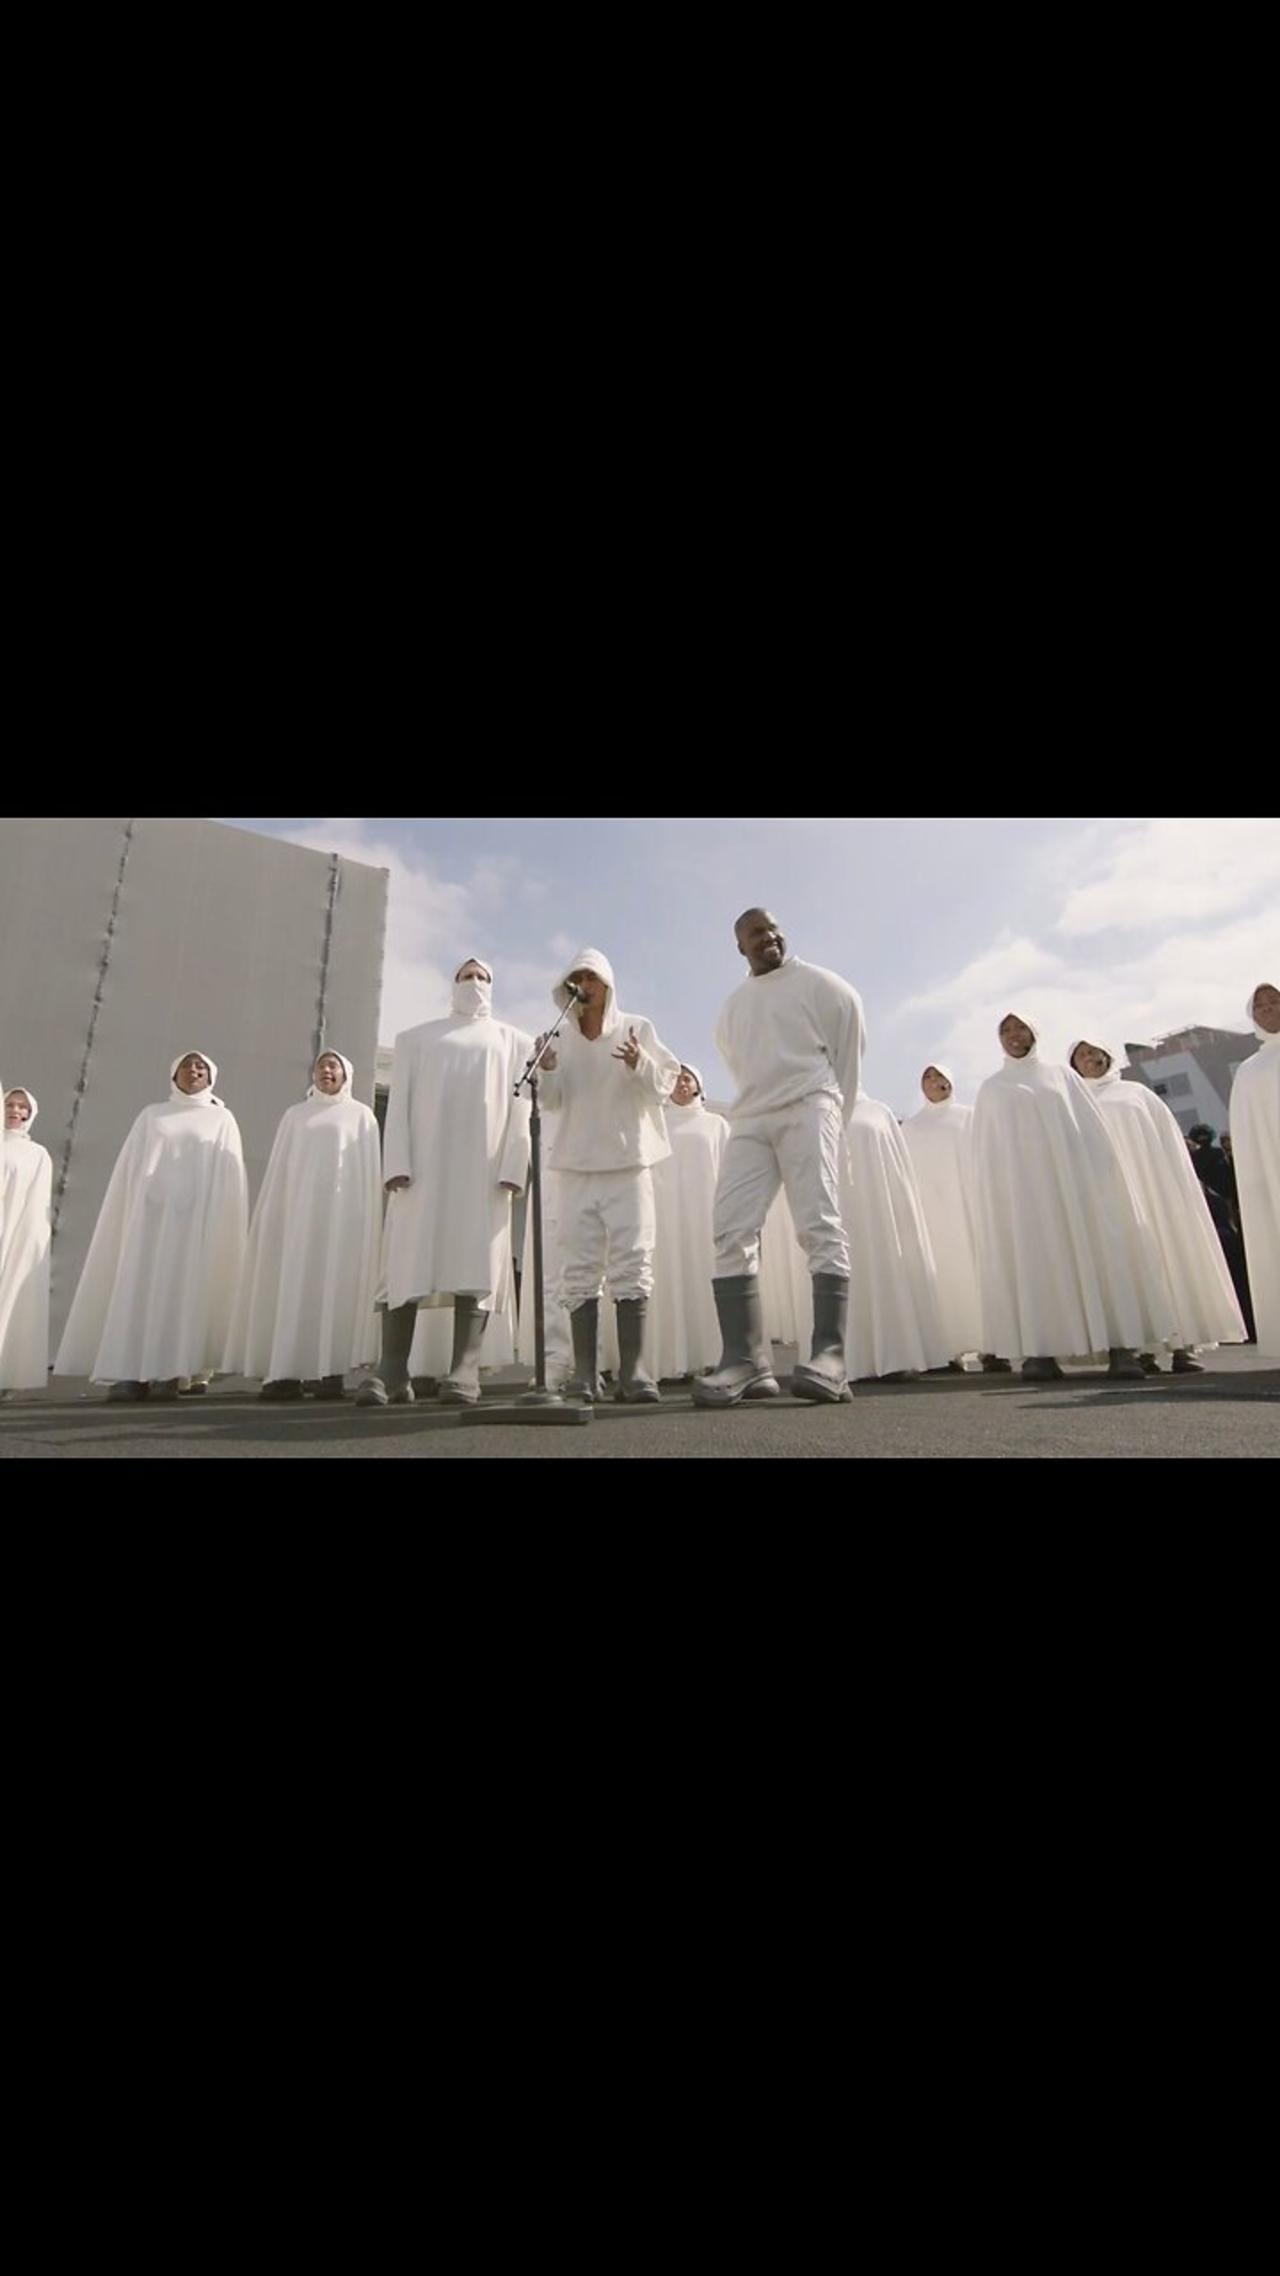 Kanye 'Ye' West In Jamaica With His Sunday Service Choir